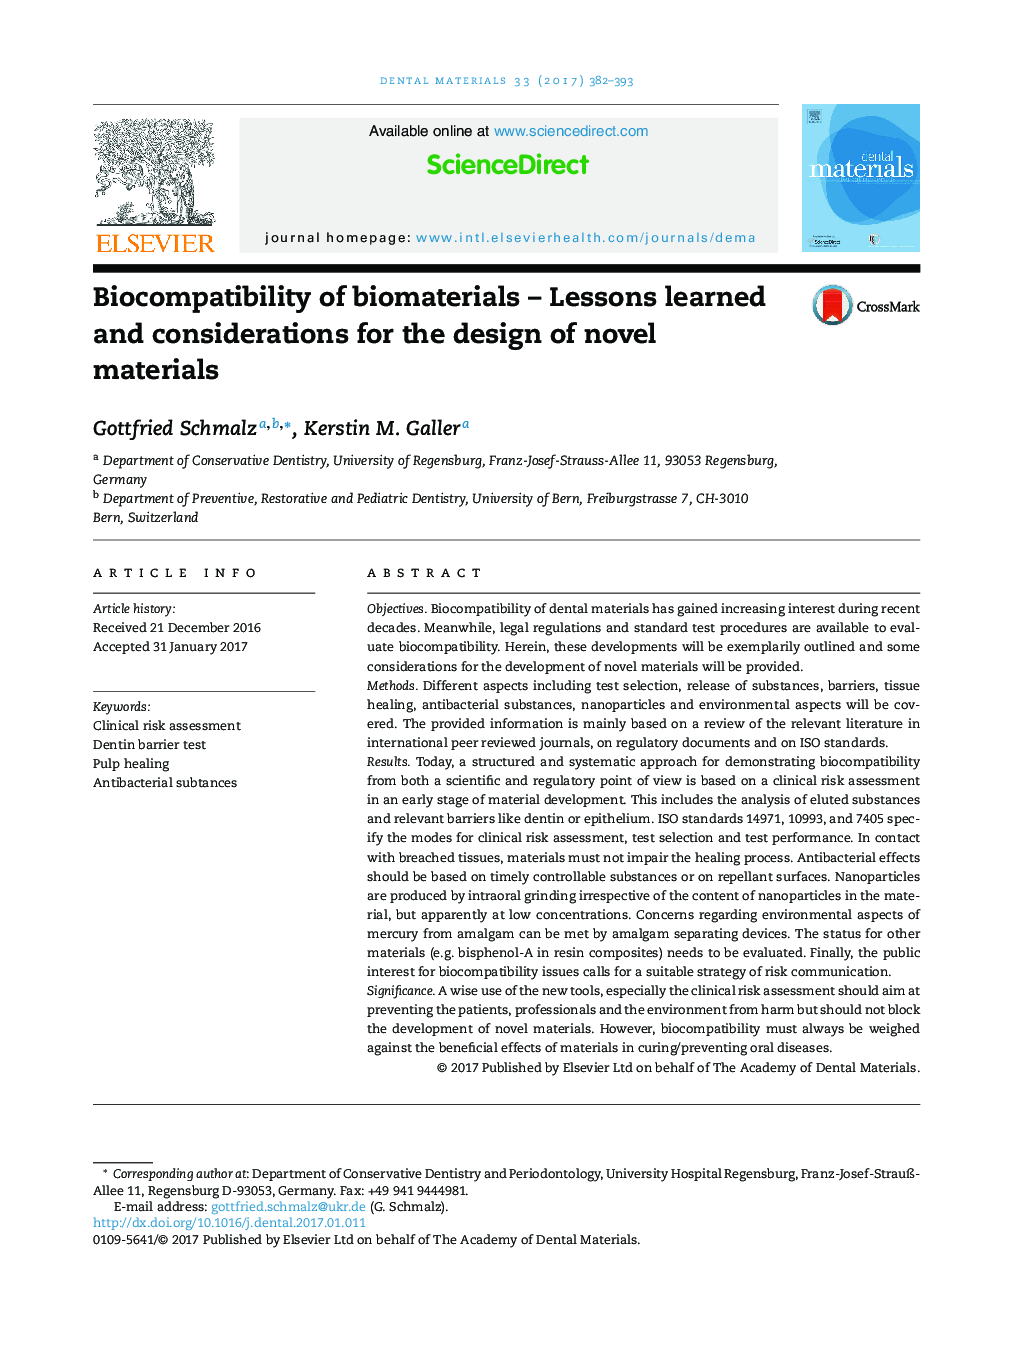 Biocompatibility of biomaterials - Lessons learned and considerations for the design of novel materials